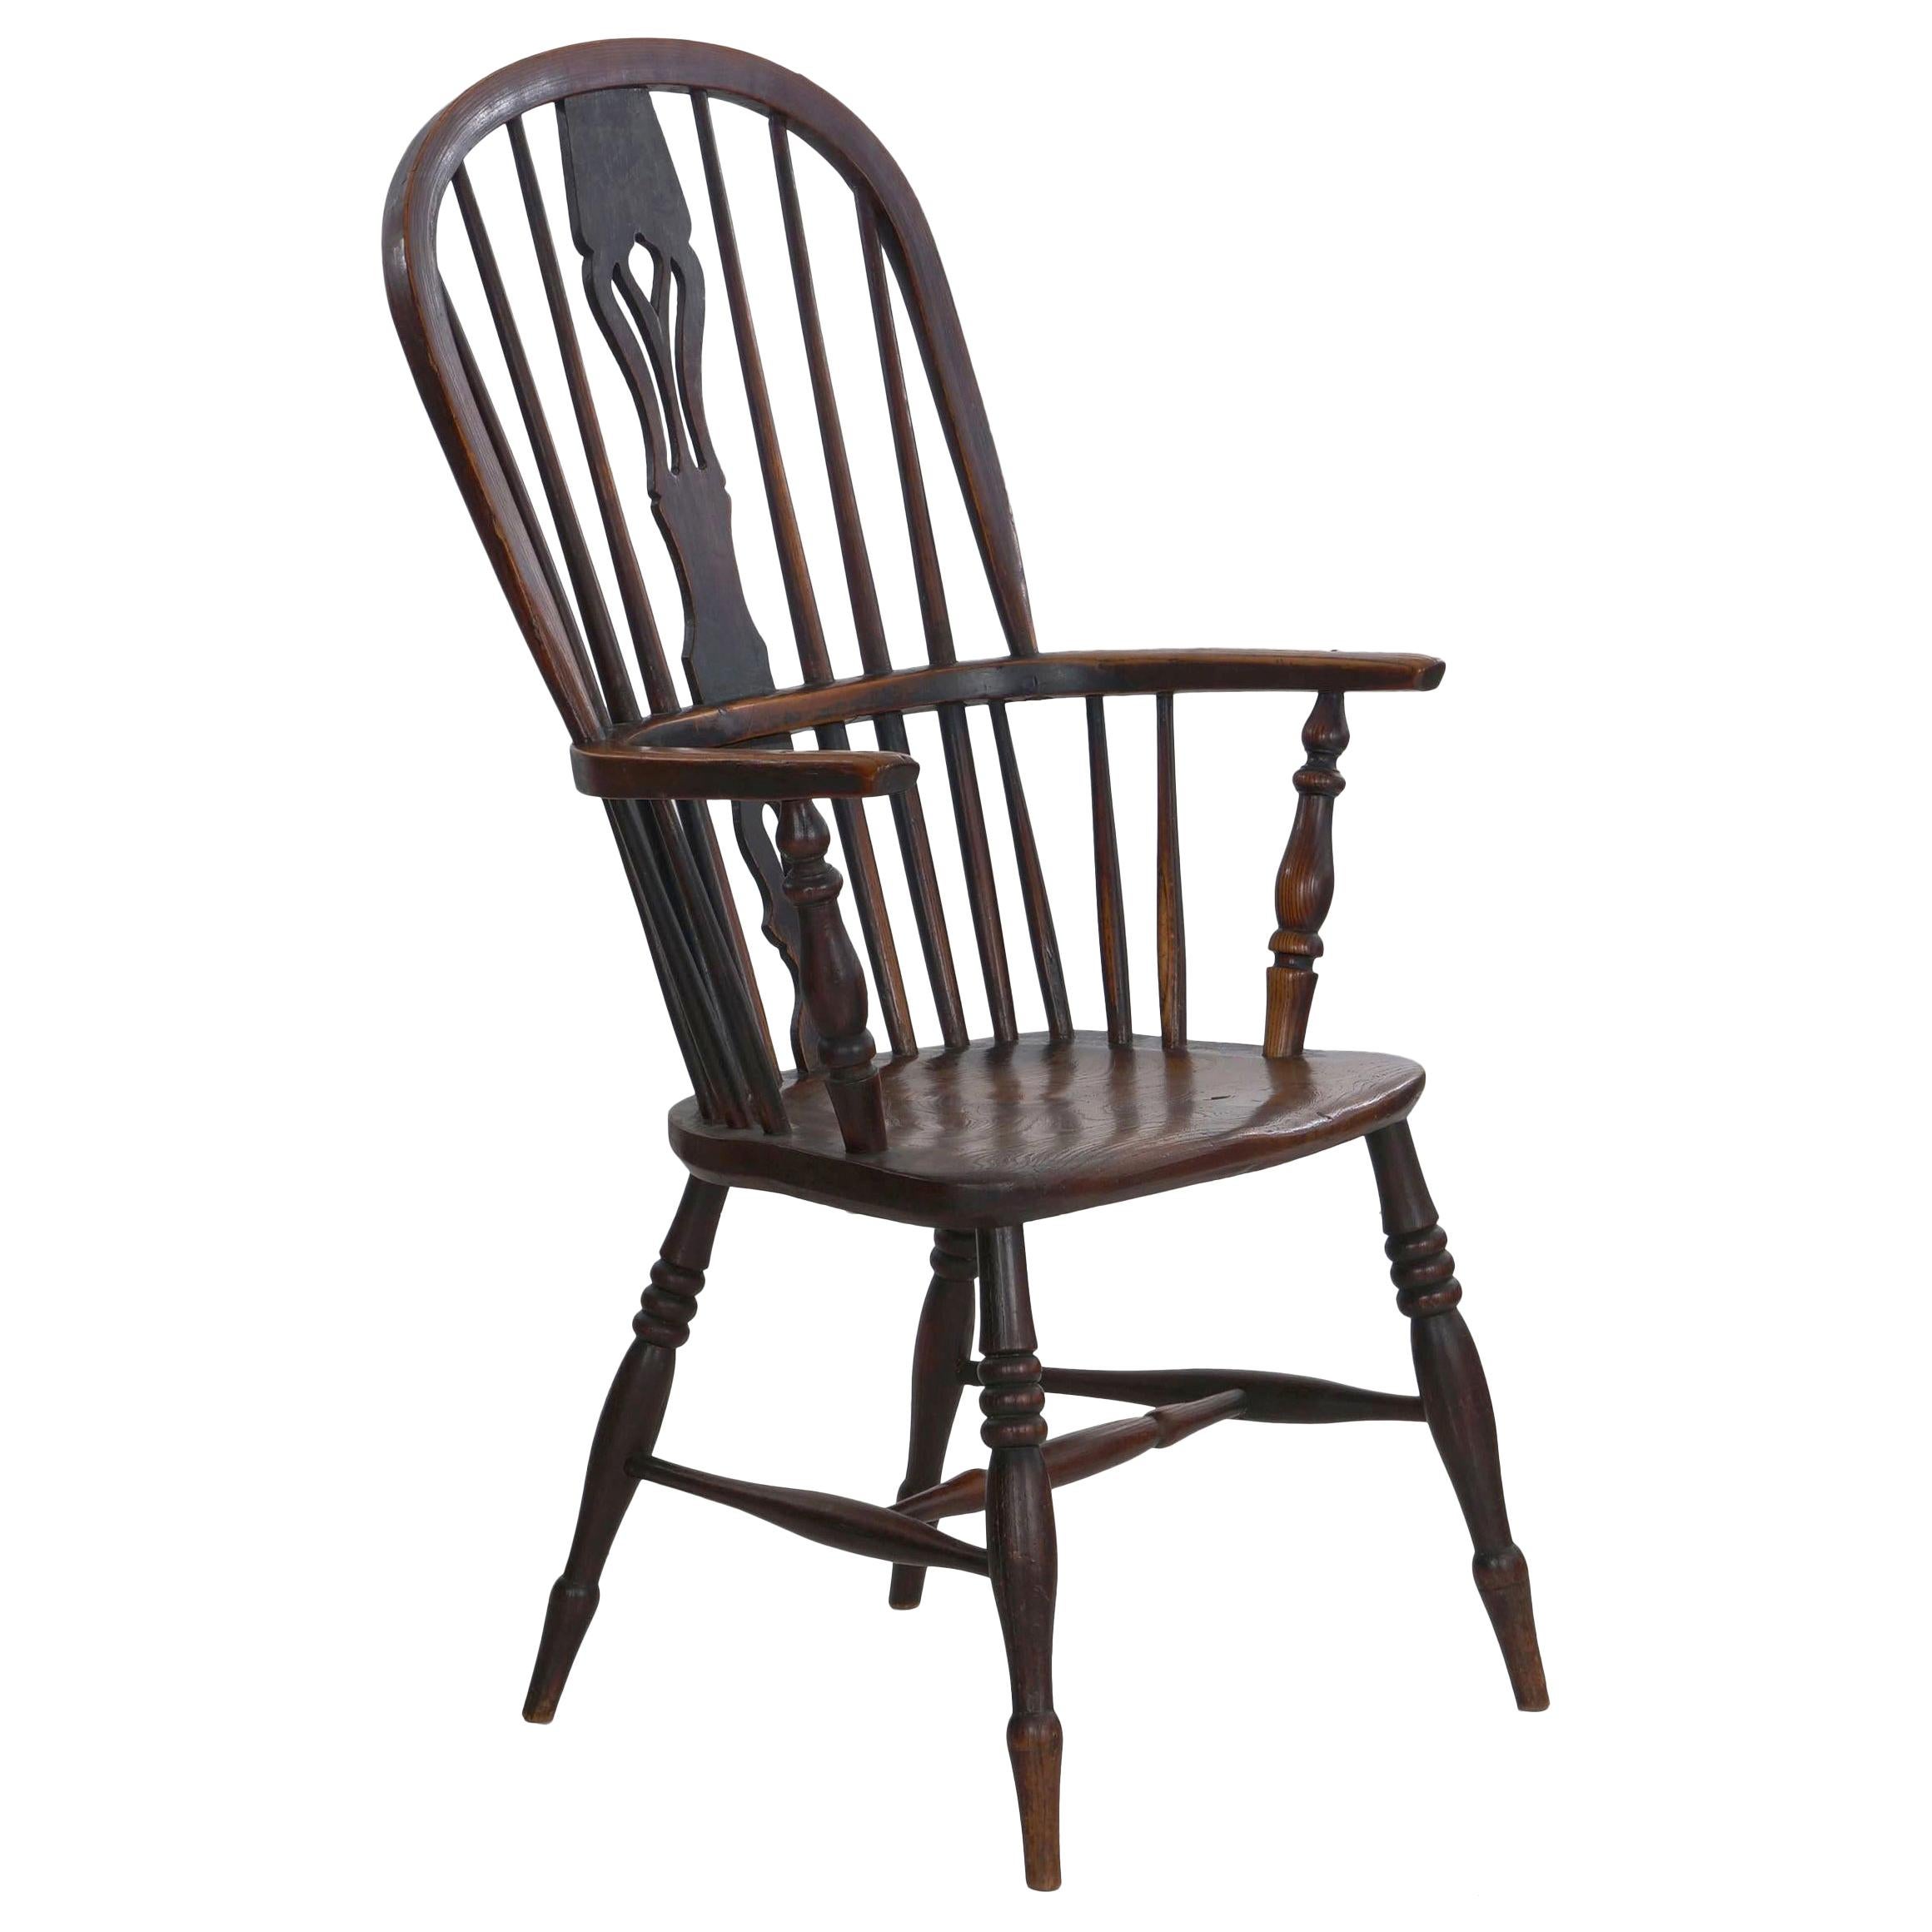 English Windsor Elm and Yew Antique Armchair, circa 1830-1850